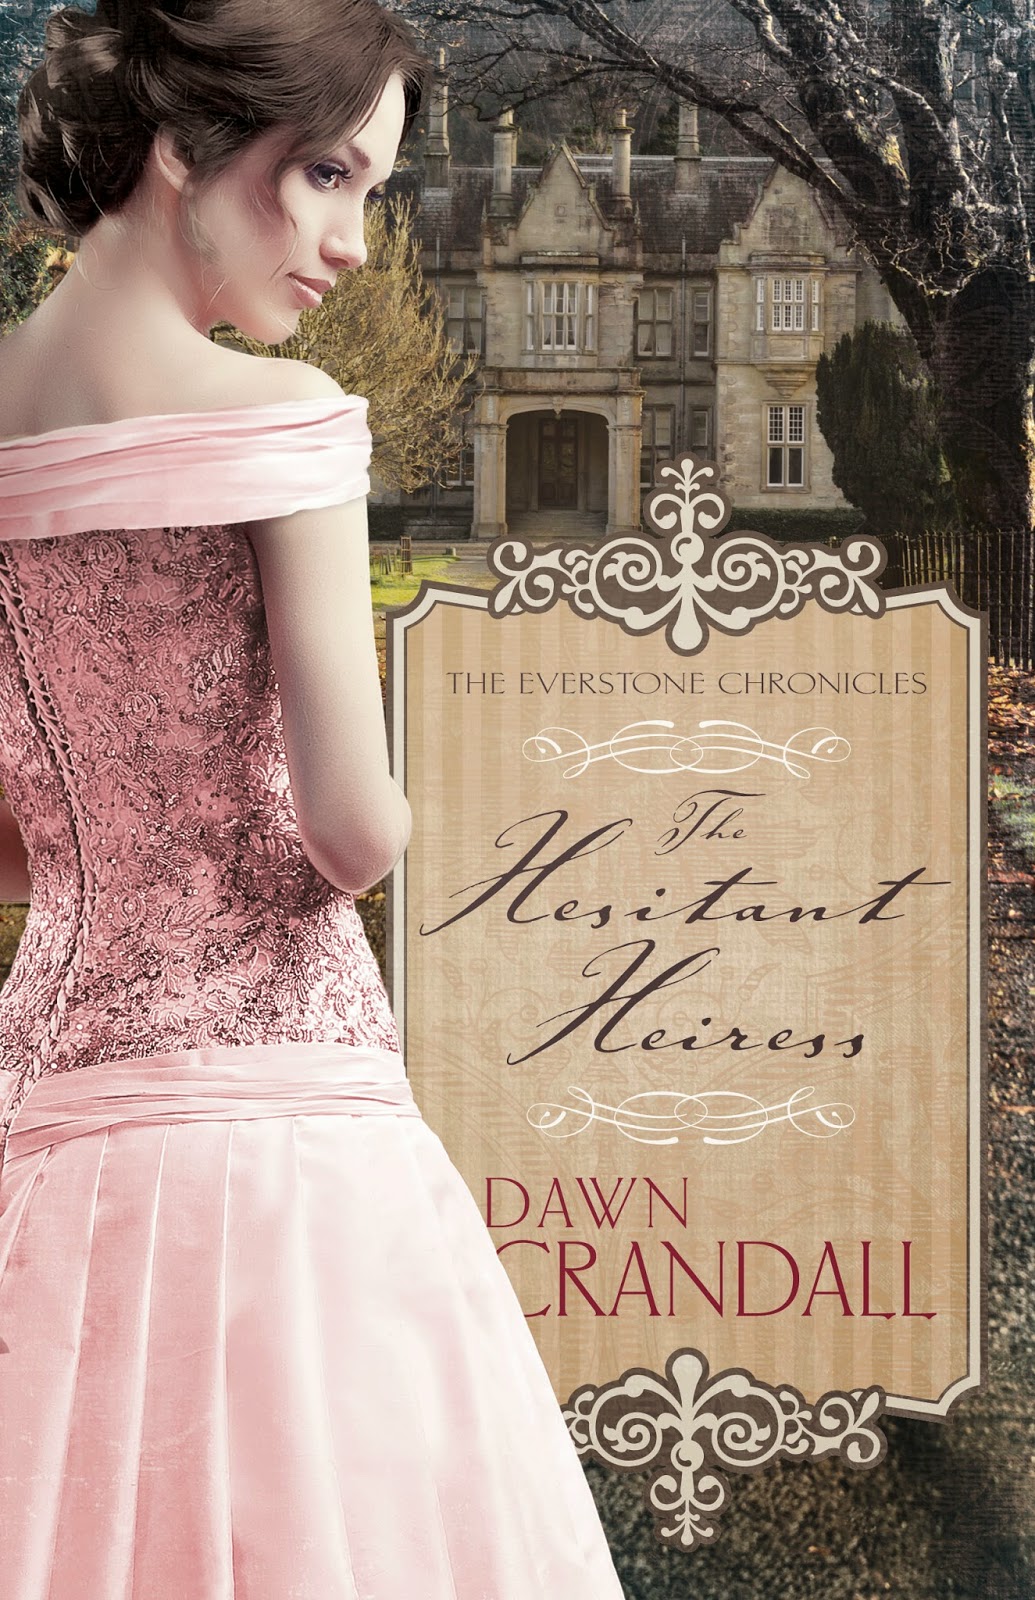 You are currently viewing COTT: The Hesistant Heiress by Dawn Crandall